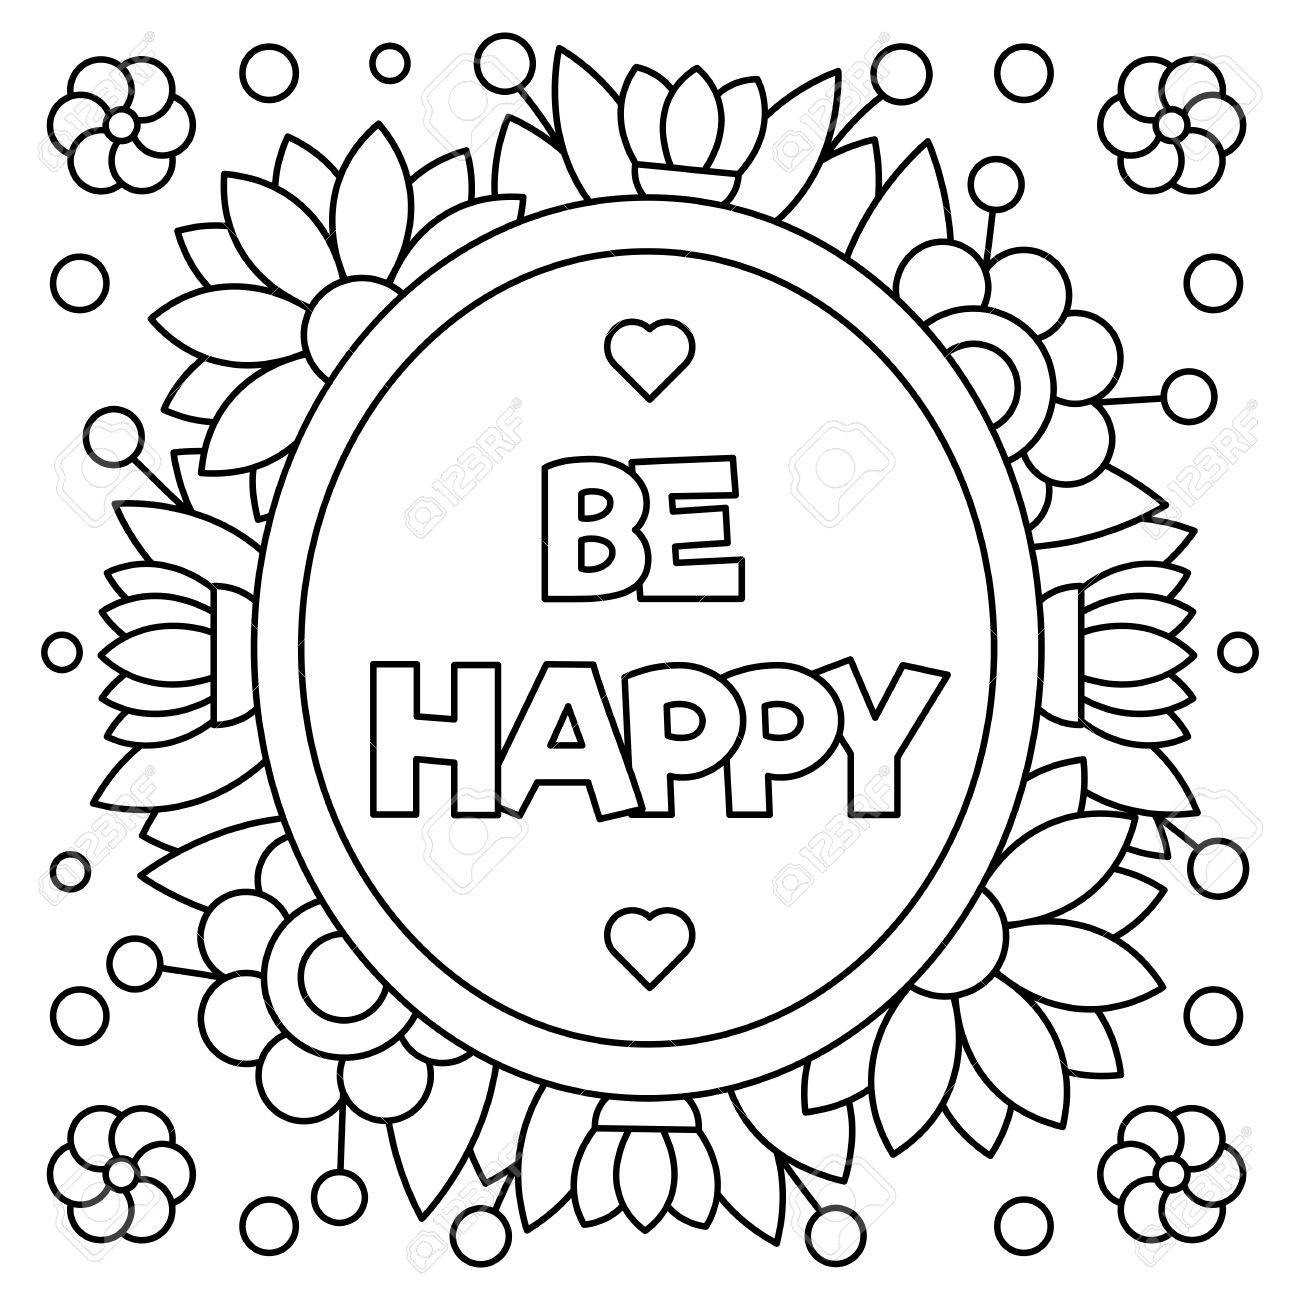 Be happy coloring page vector illustration royalty free svg cliparts vectors and stock illustration image